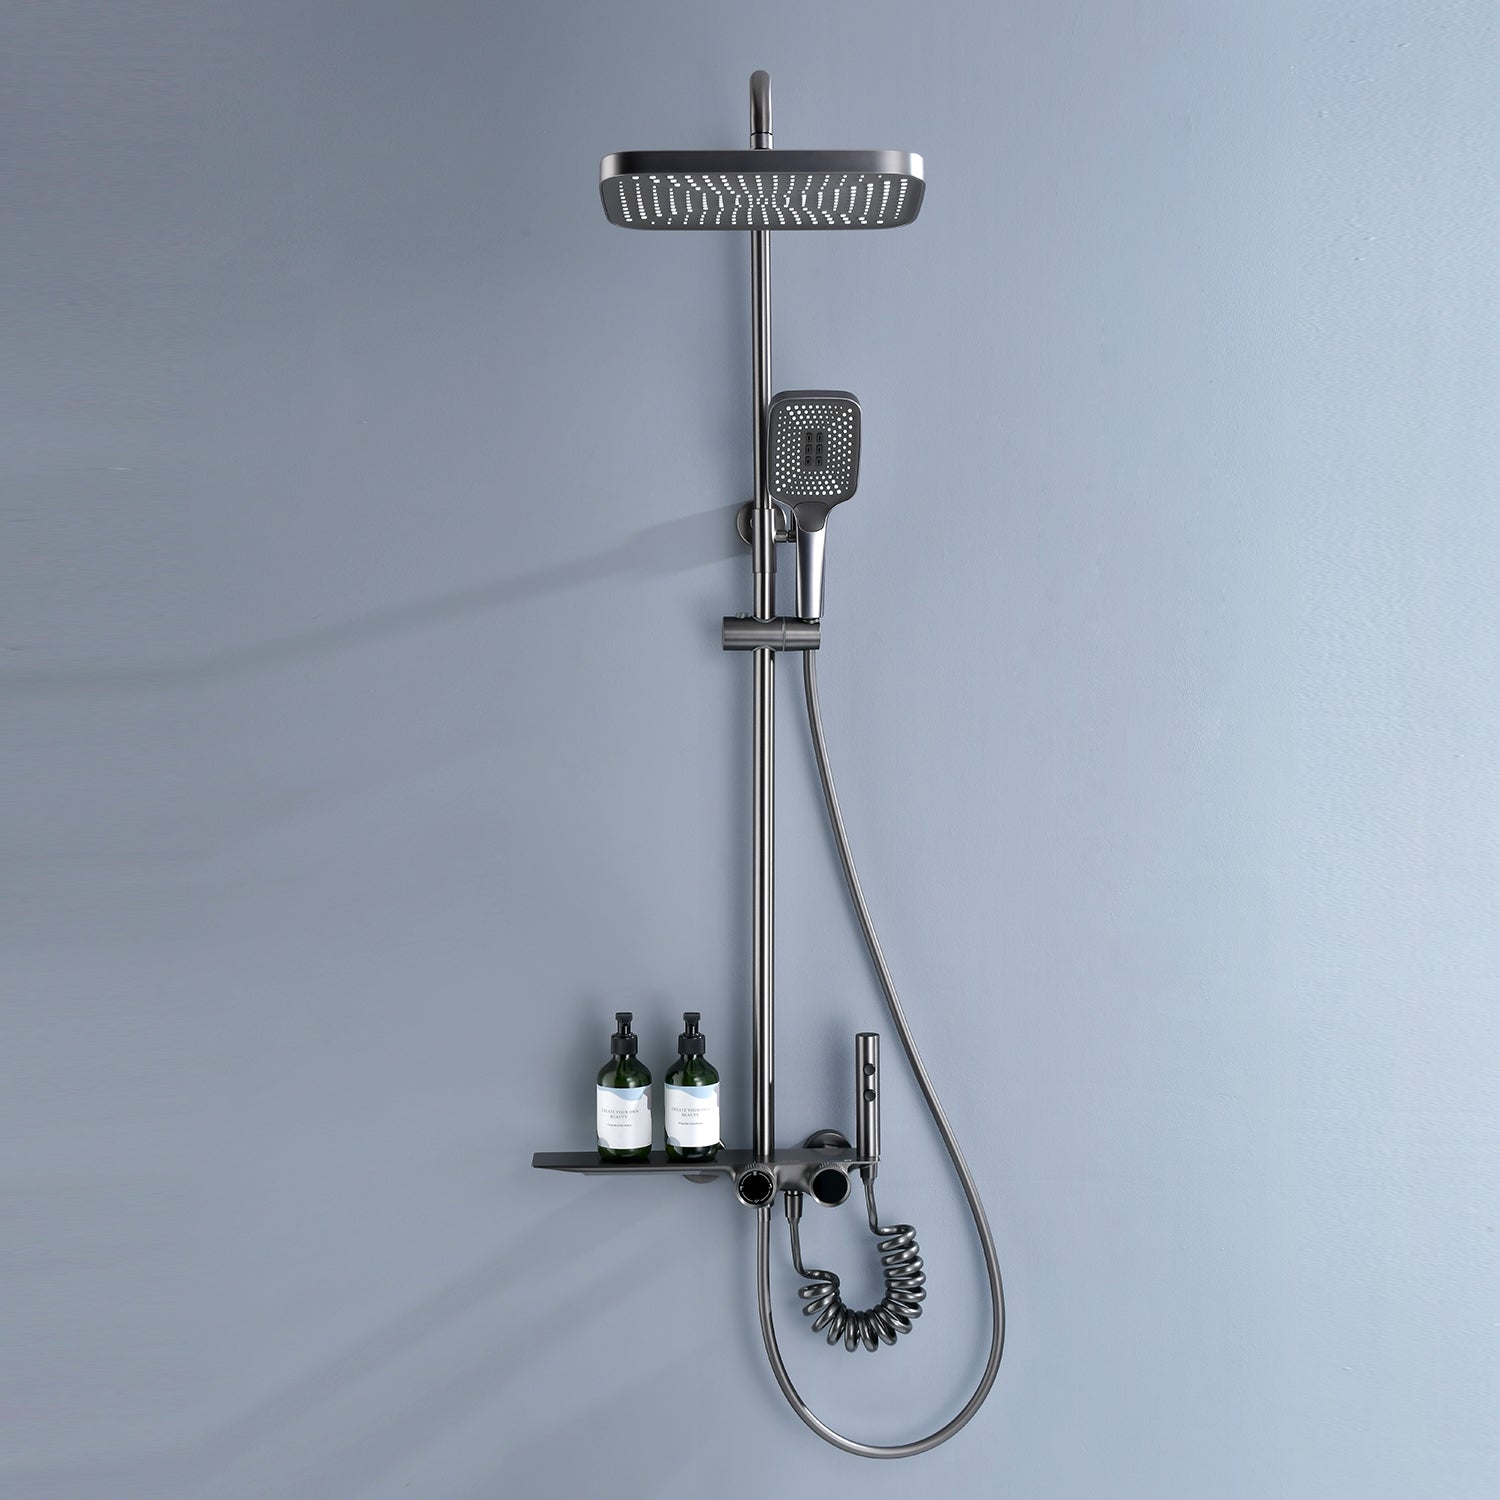 Lefton Shower System with Temperature Display